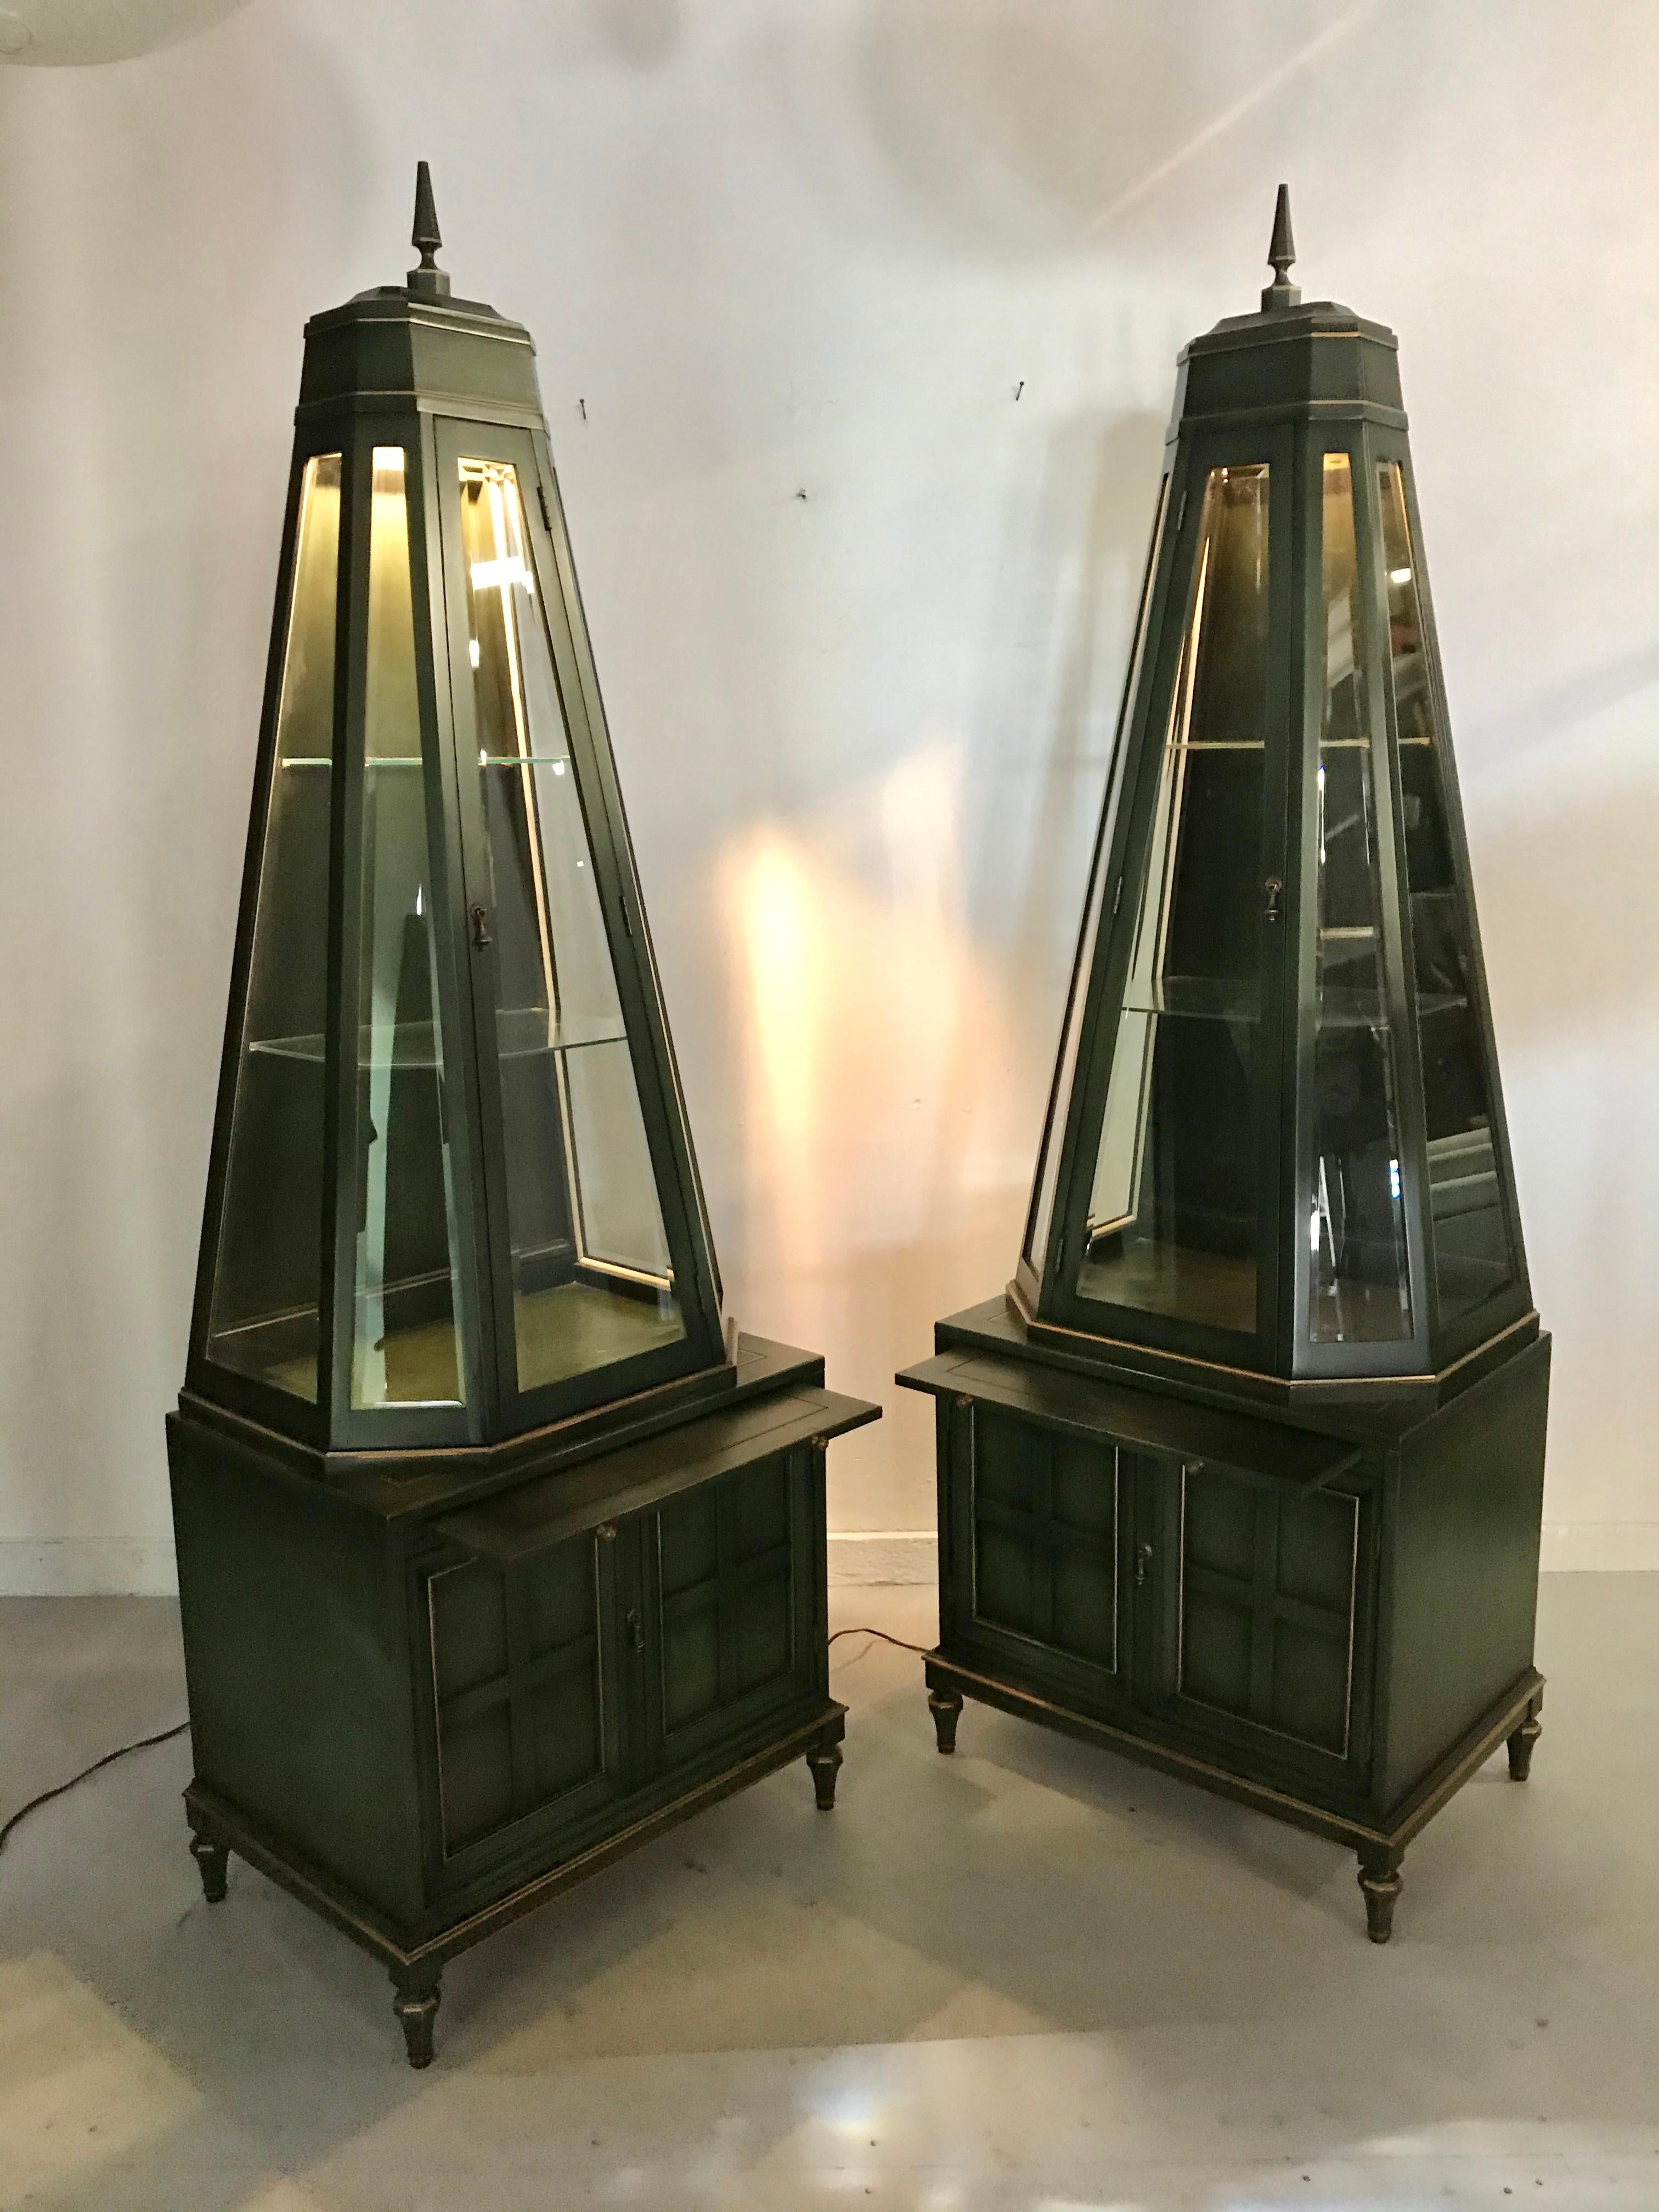 Unusual Pair of Decorative Pyramidal Curio Cabinets, Vitrines by Union National 1